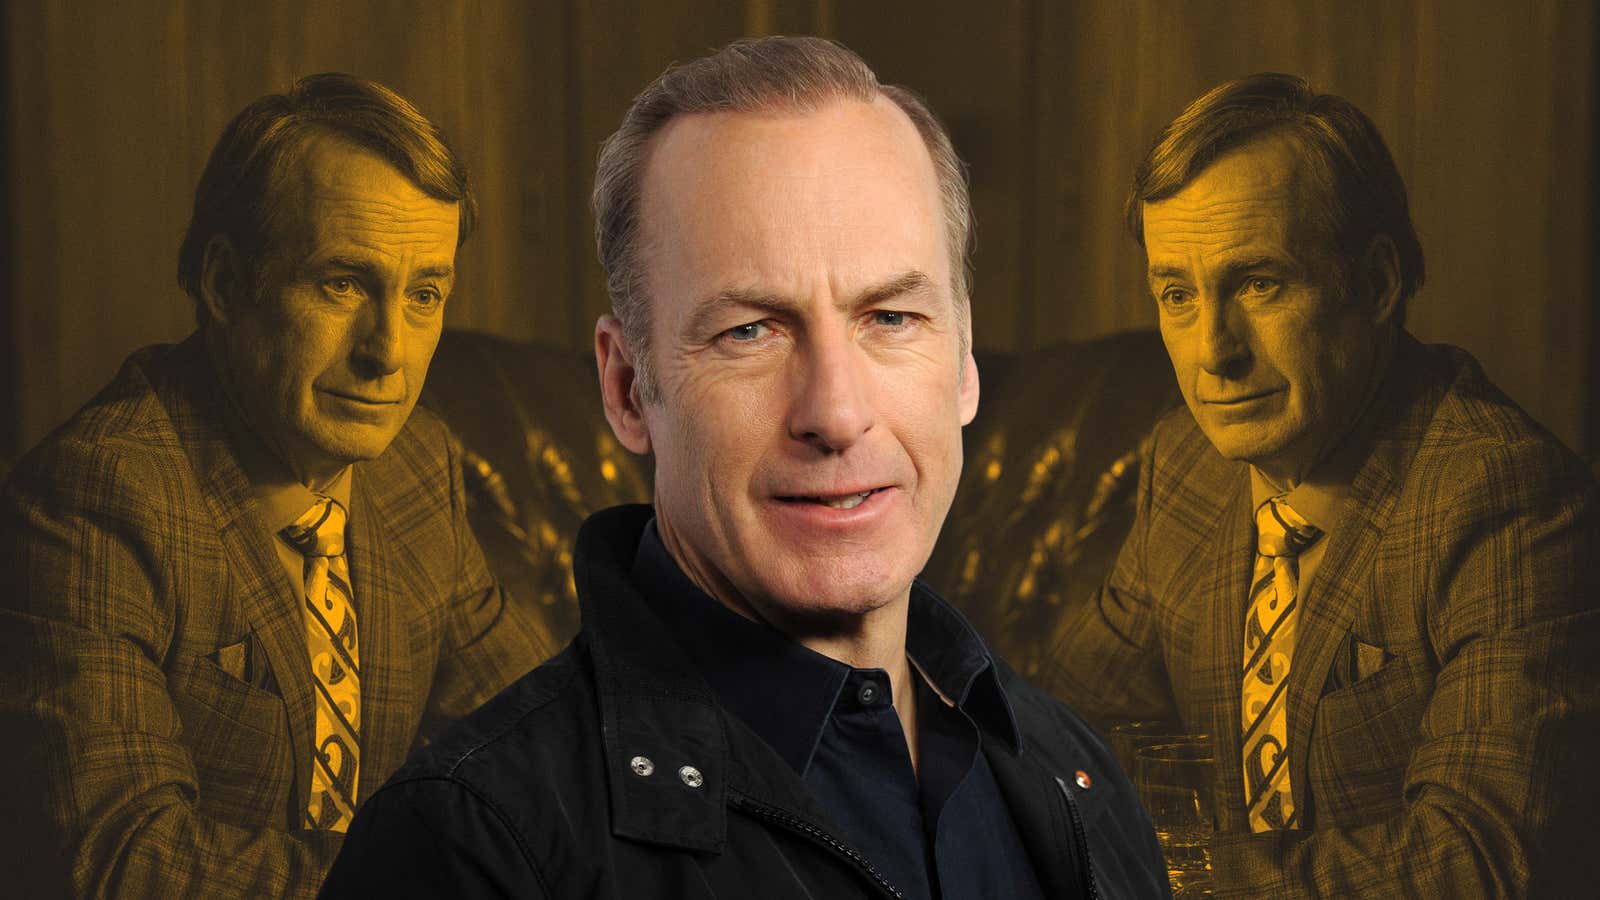 One Scene Completely Changed How The Writers Approached Better Call Saul